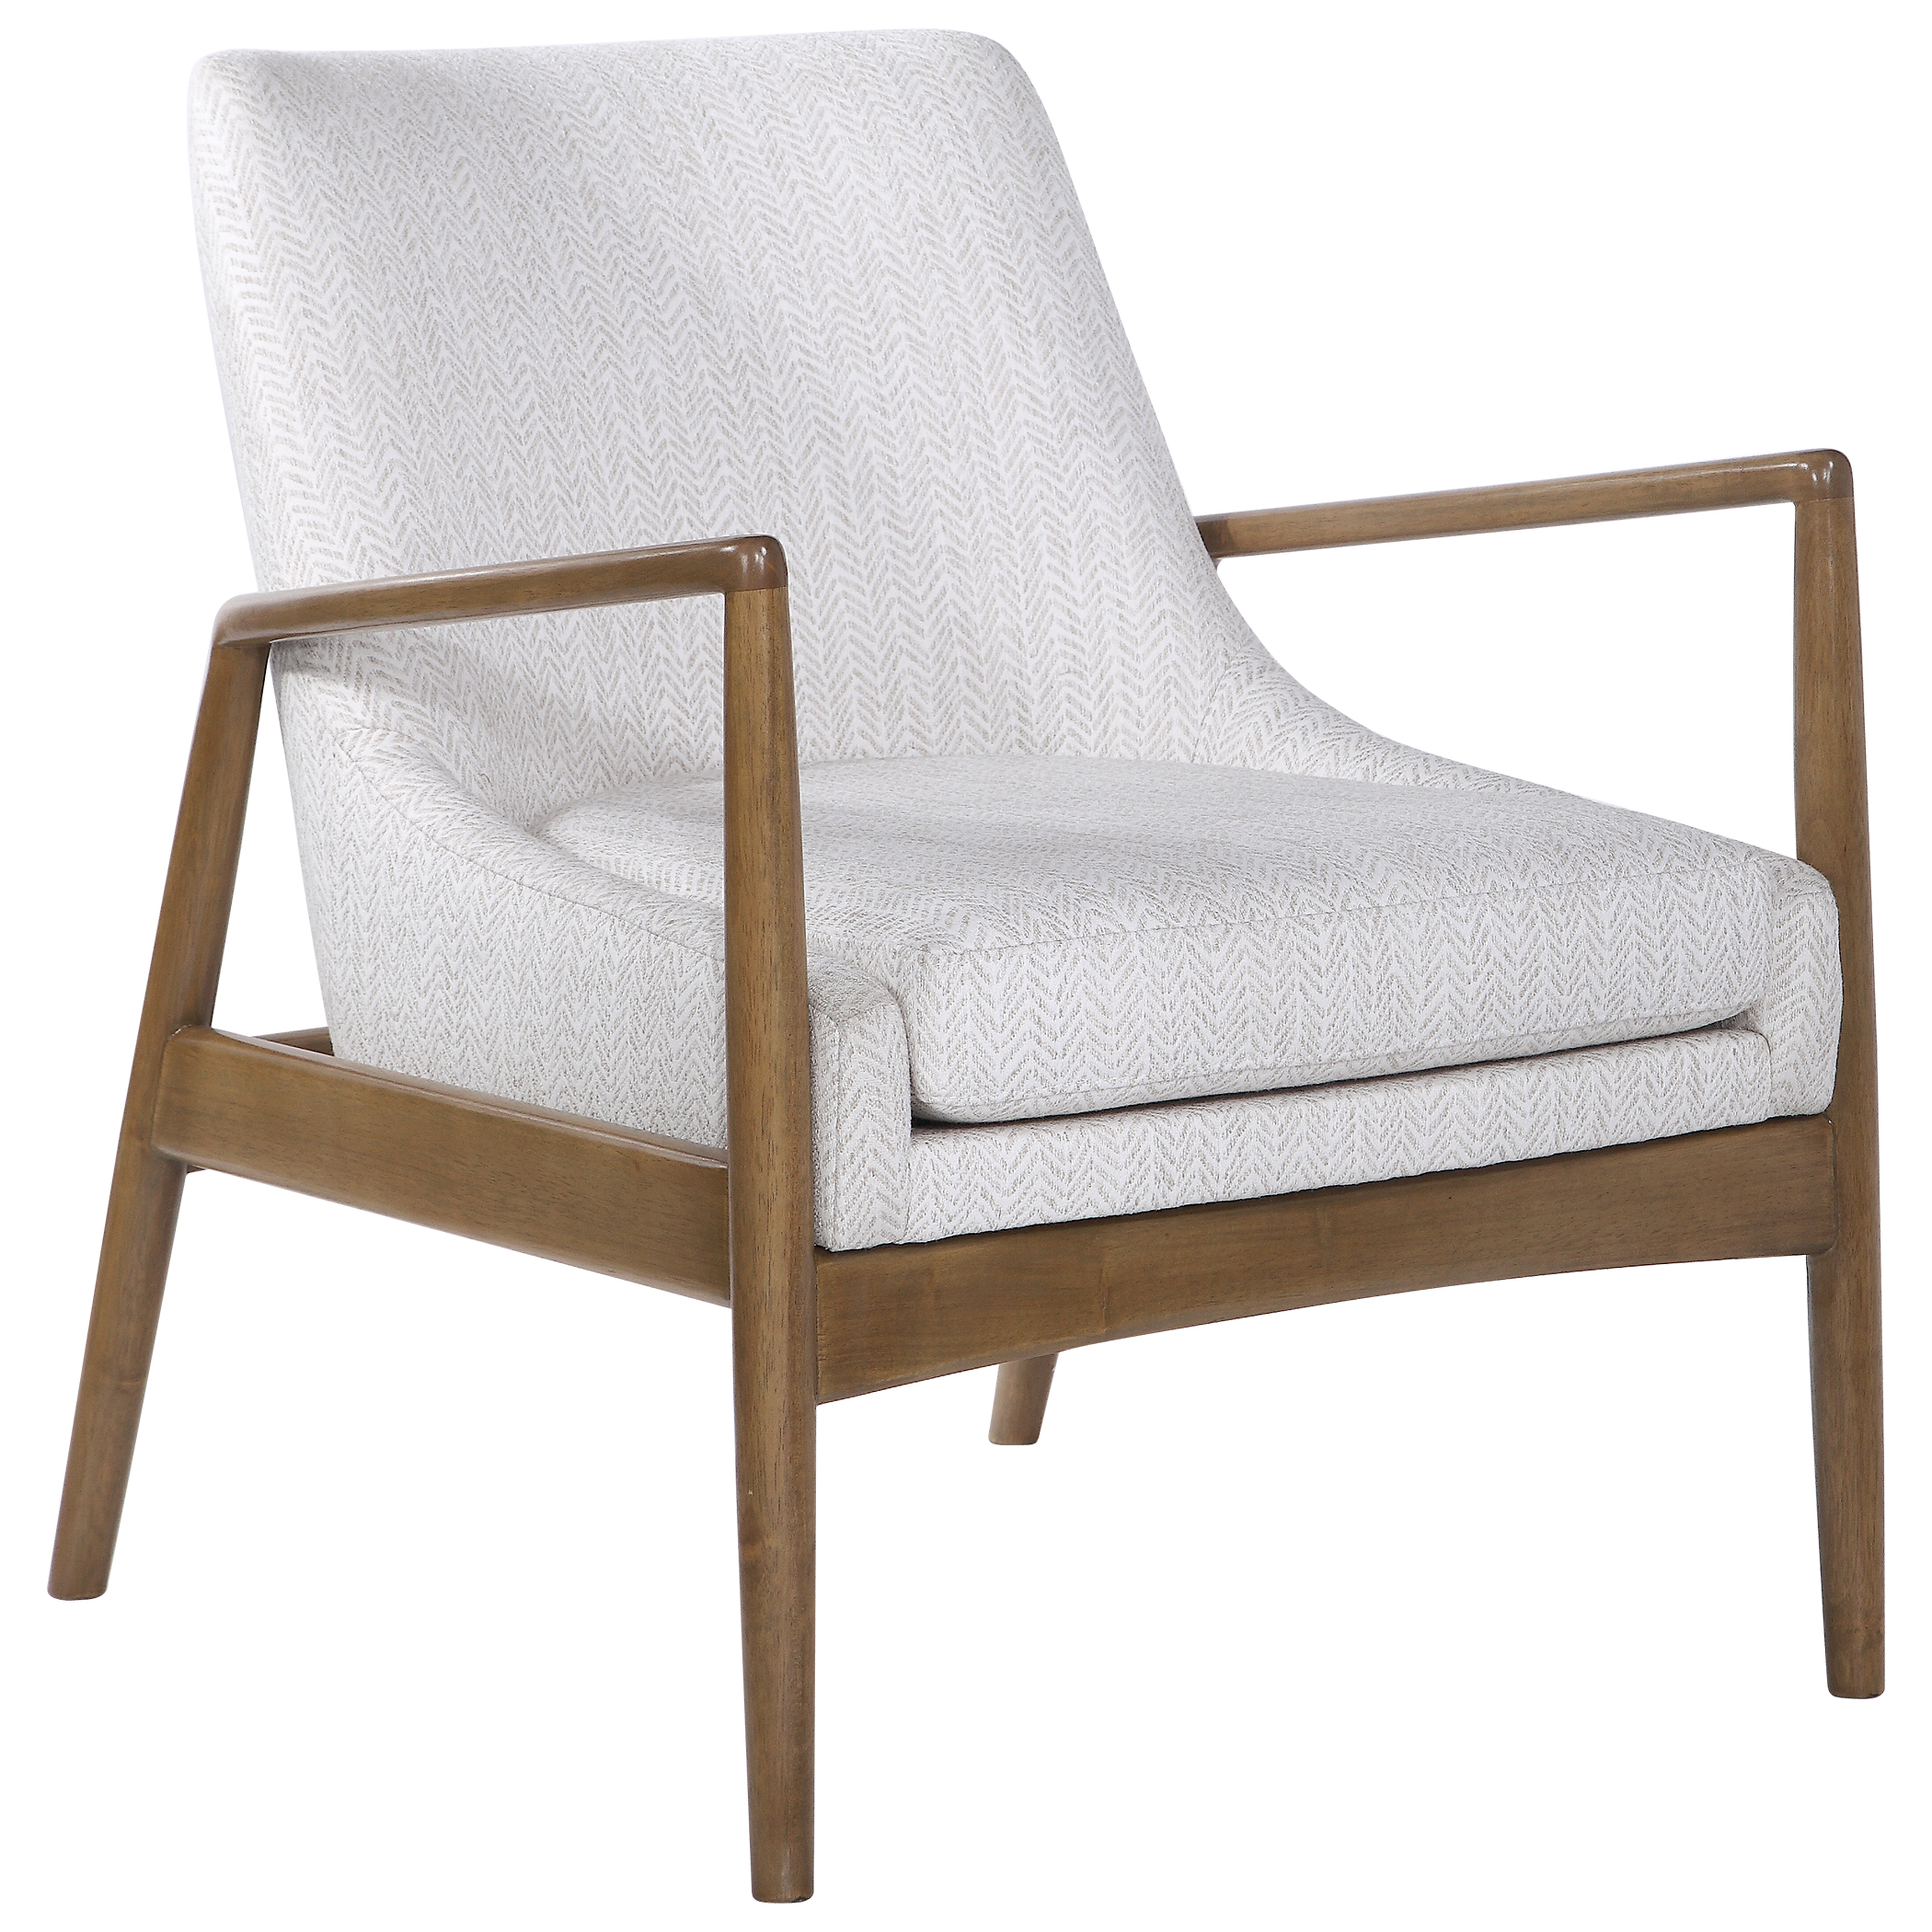 Bev Accent Chair, White - Hudsonhill Foundry